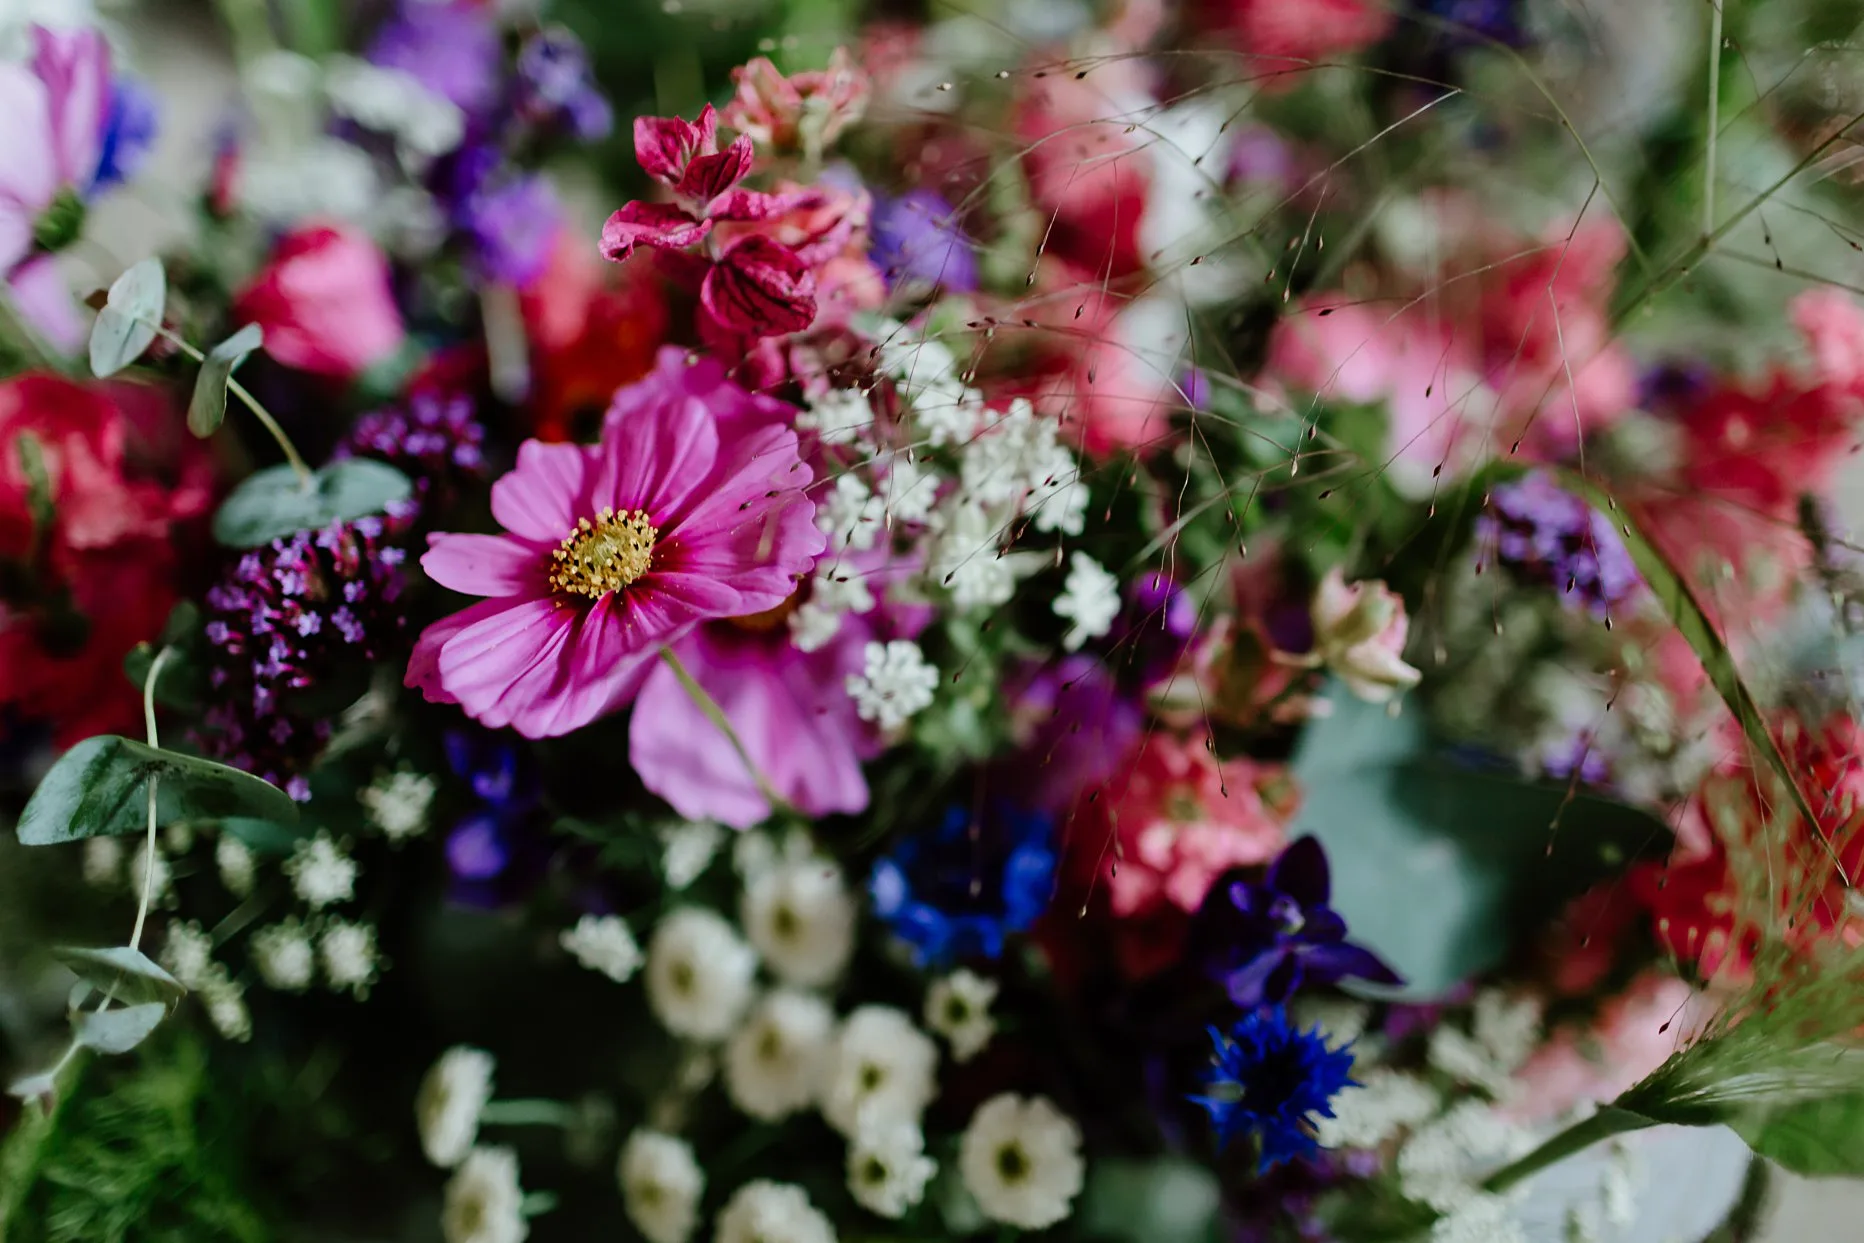 Close up detail photo of colourful flowers in wedding bouquet. Wild flowers and foliage.